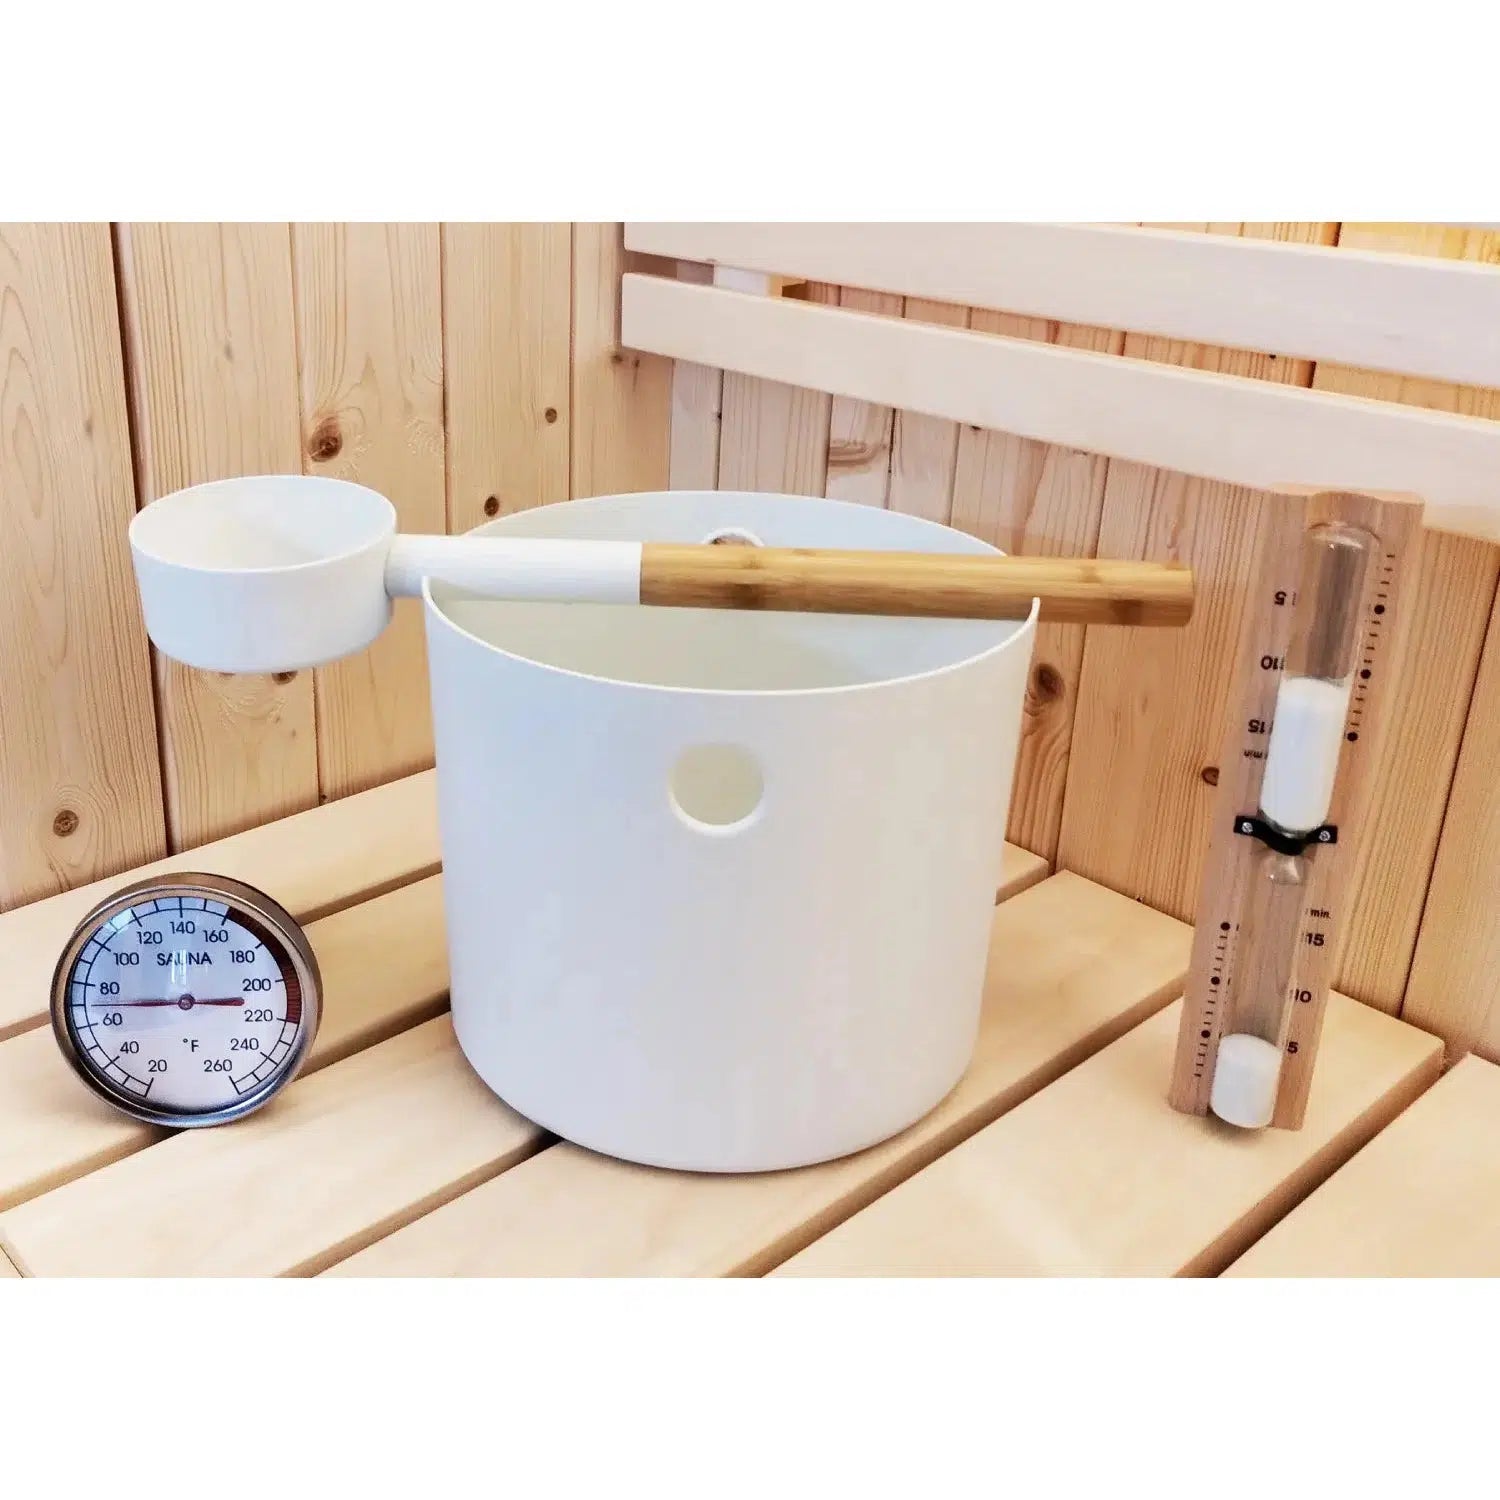 Bucket and Ladle Package 2 Timer, Thermometer w/Premium Bucket & Ladle - Sauna Accessory Package - White - Purely Relaxation